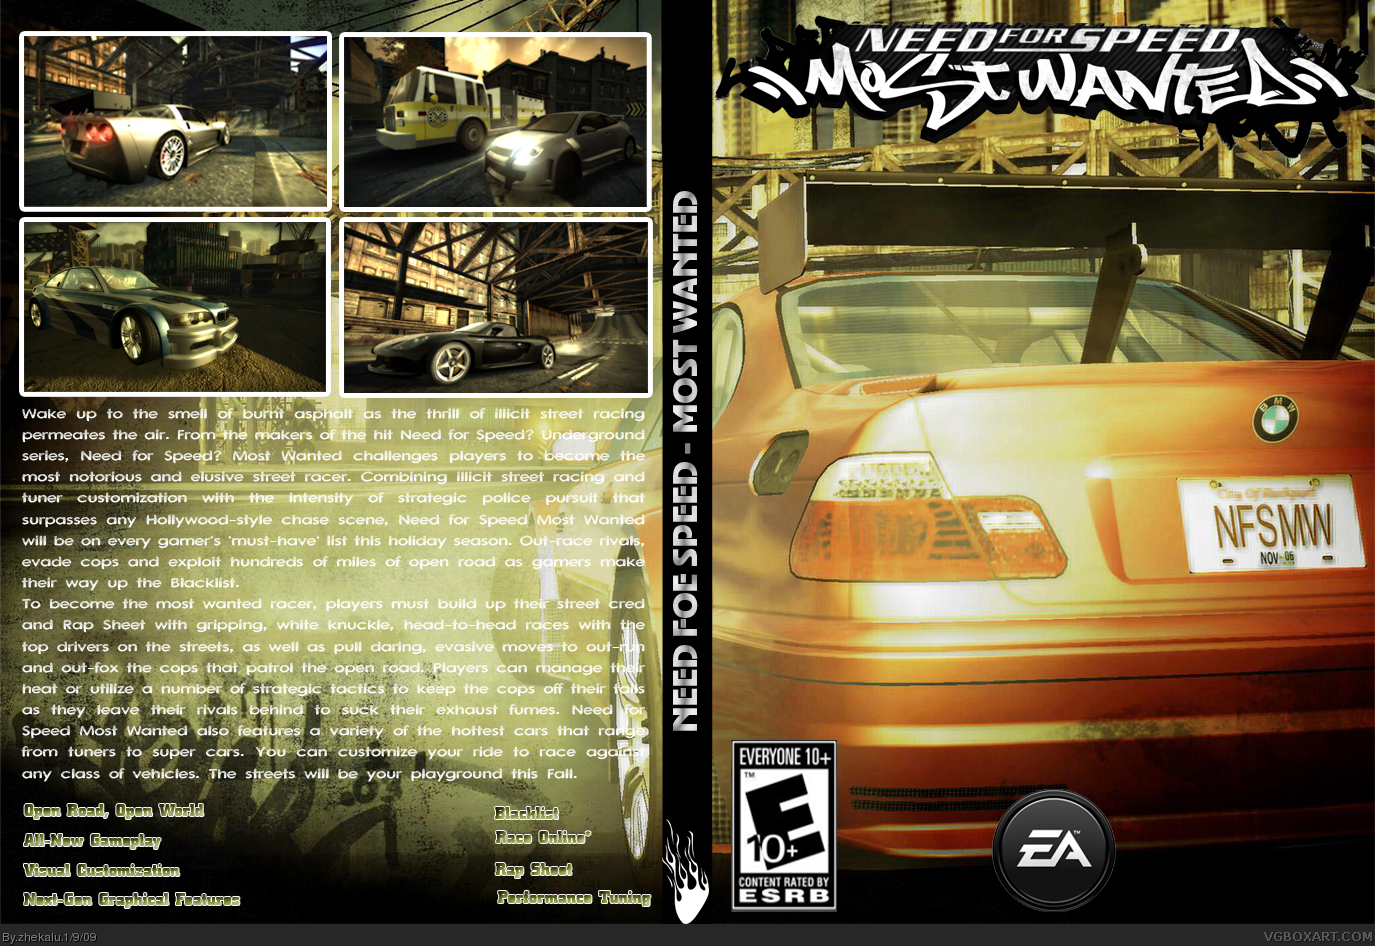 Nfs most wanted 2005 стим фото 119